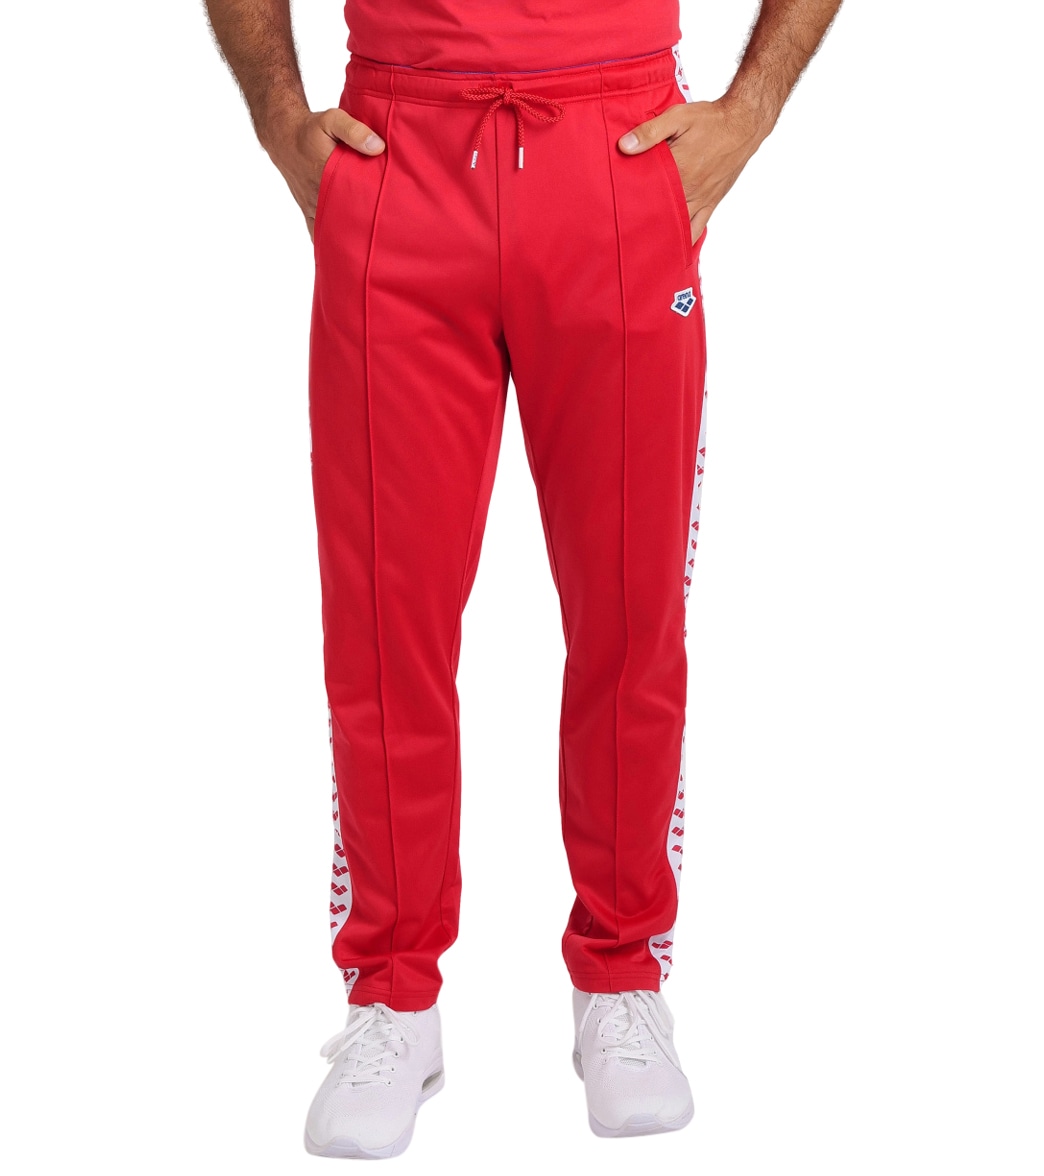 Arena Men's Relax Iv Team Pants - Red/White/Red Large Polyester - Swimoutlet.com